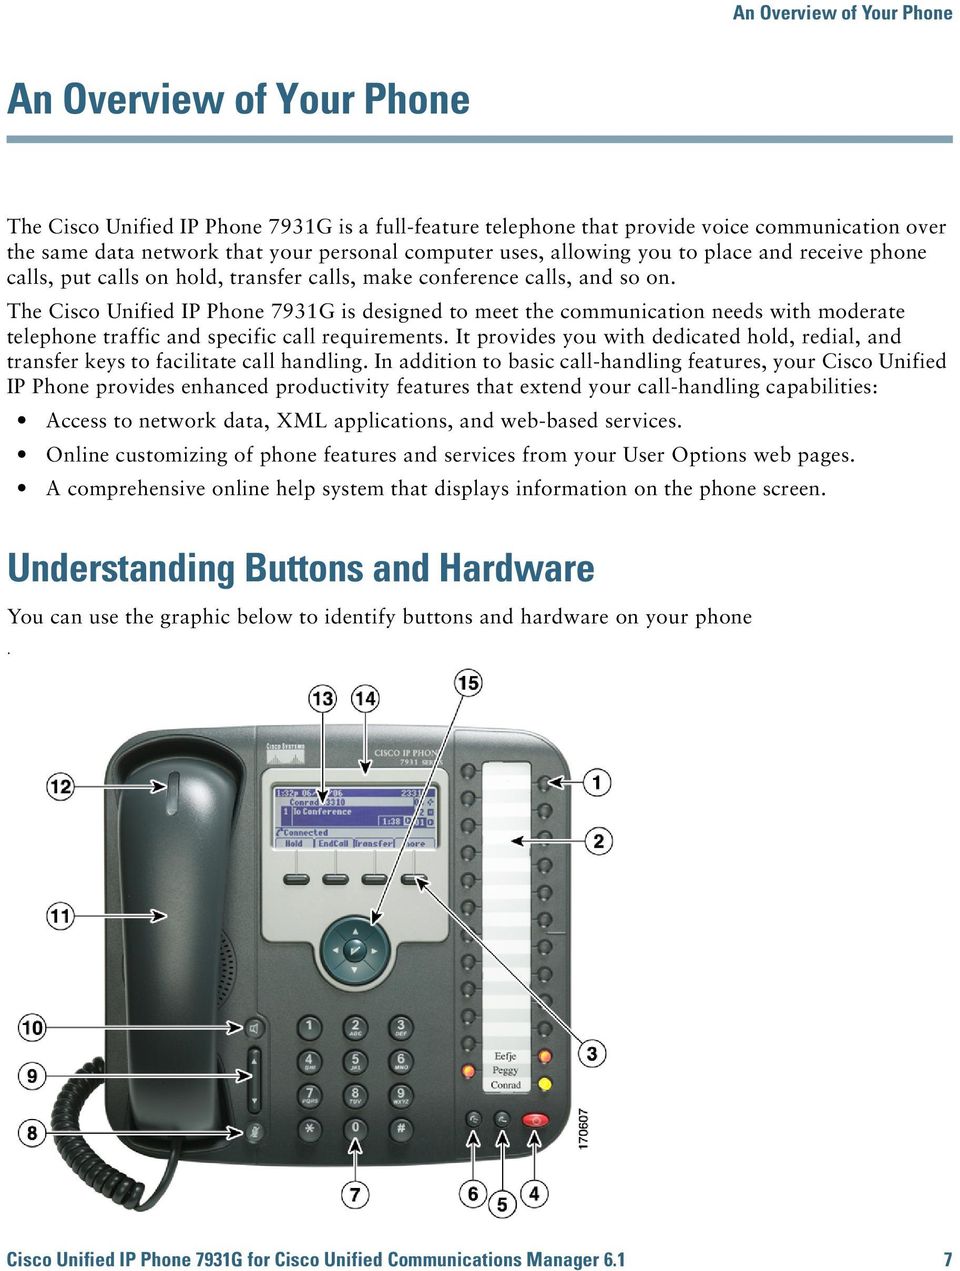 The Cisco Unified IP Phone 7931G is designed to meet the communication needs with moderate telephone traffic and specific call requirements.